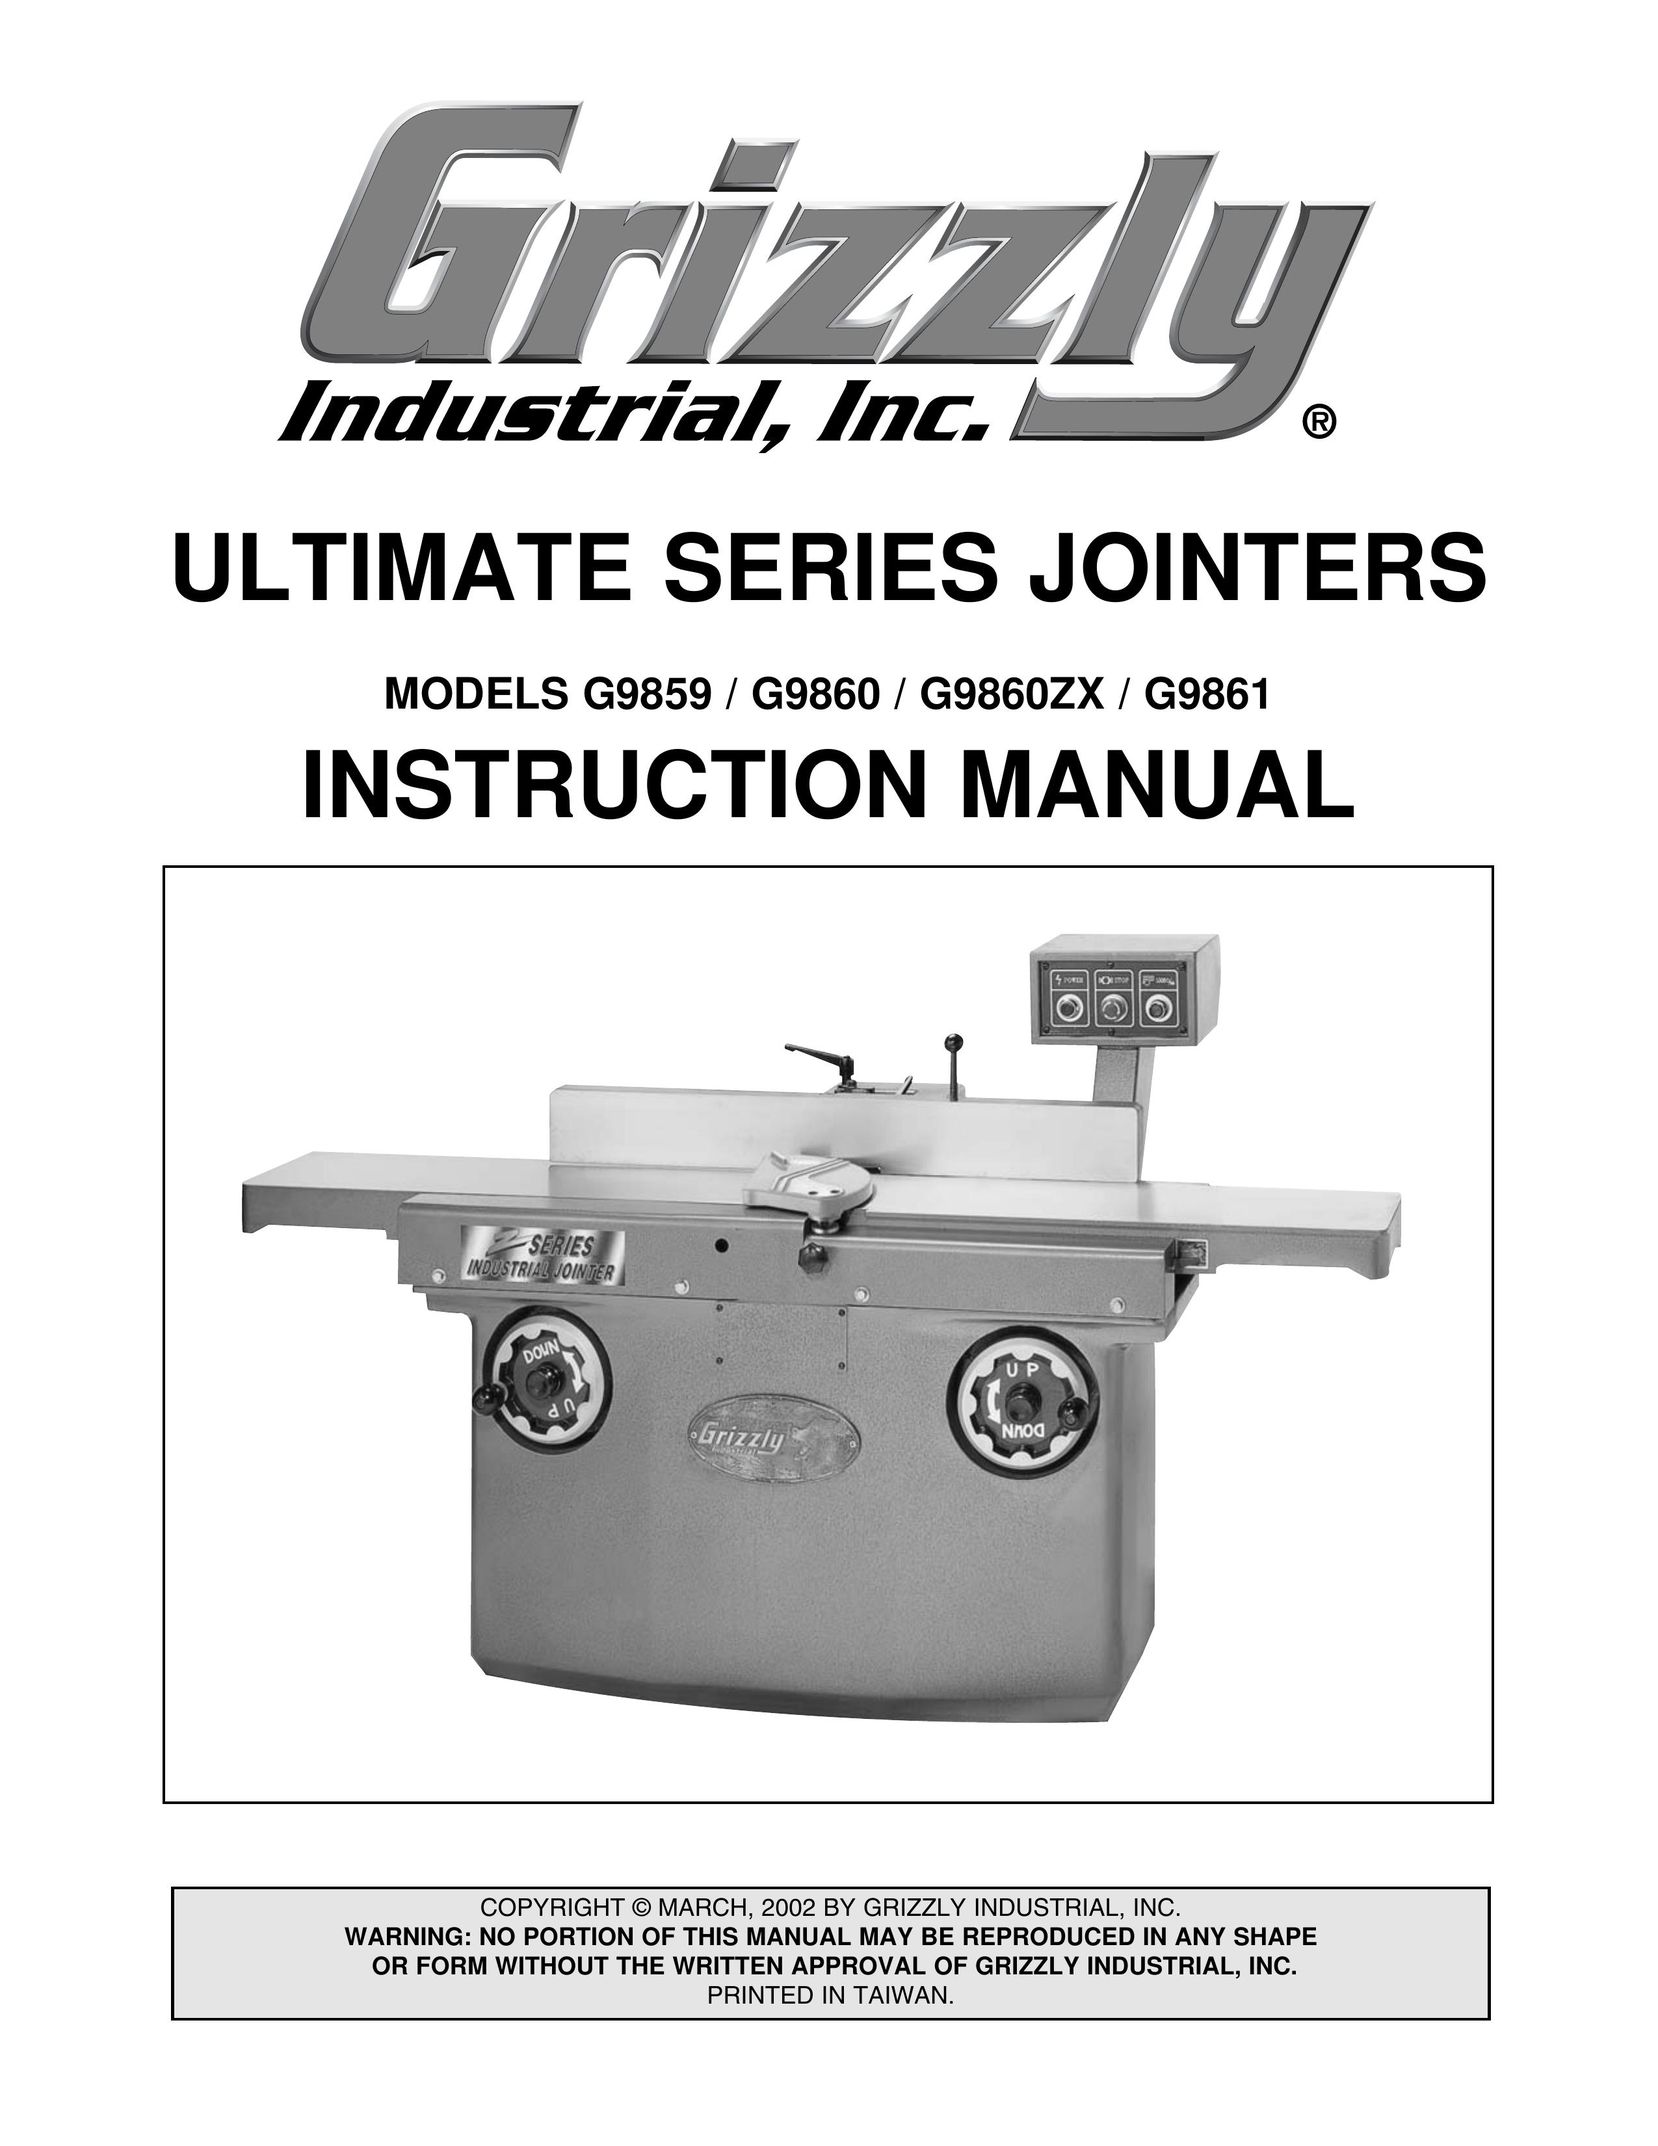 Grizzly G9860 Biscuit Joiner User Manual (Page 1)